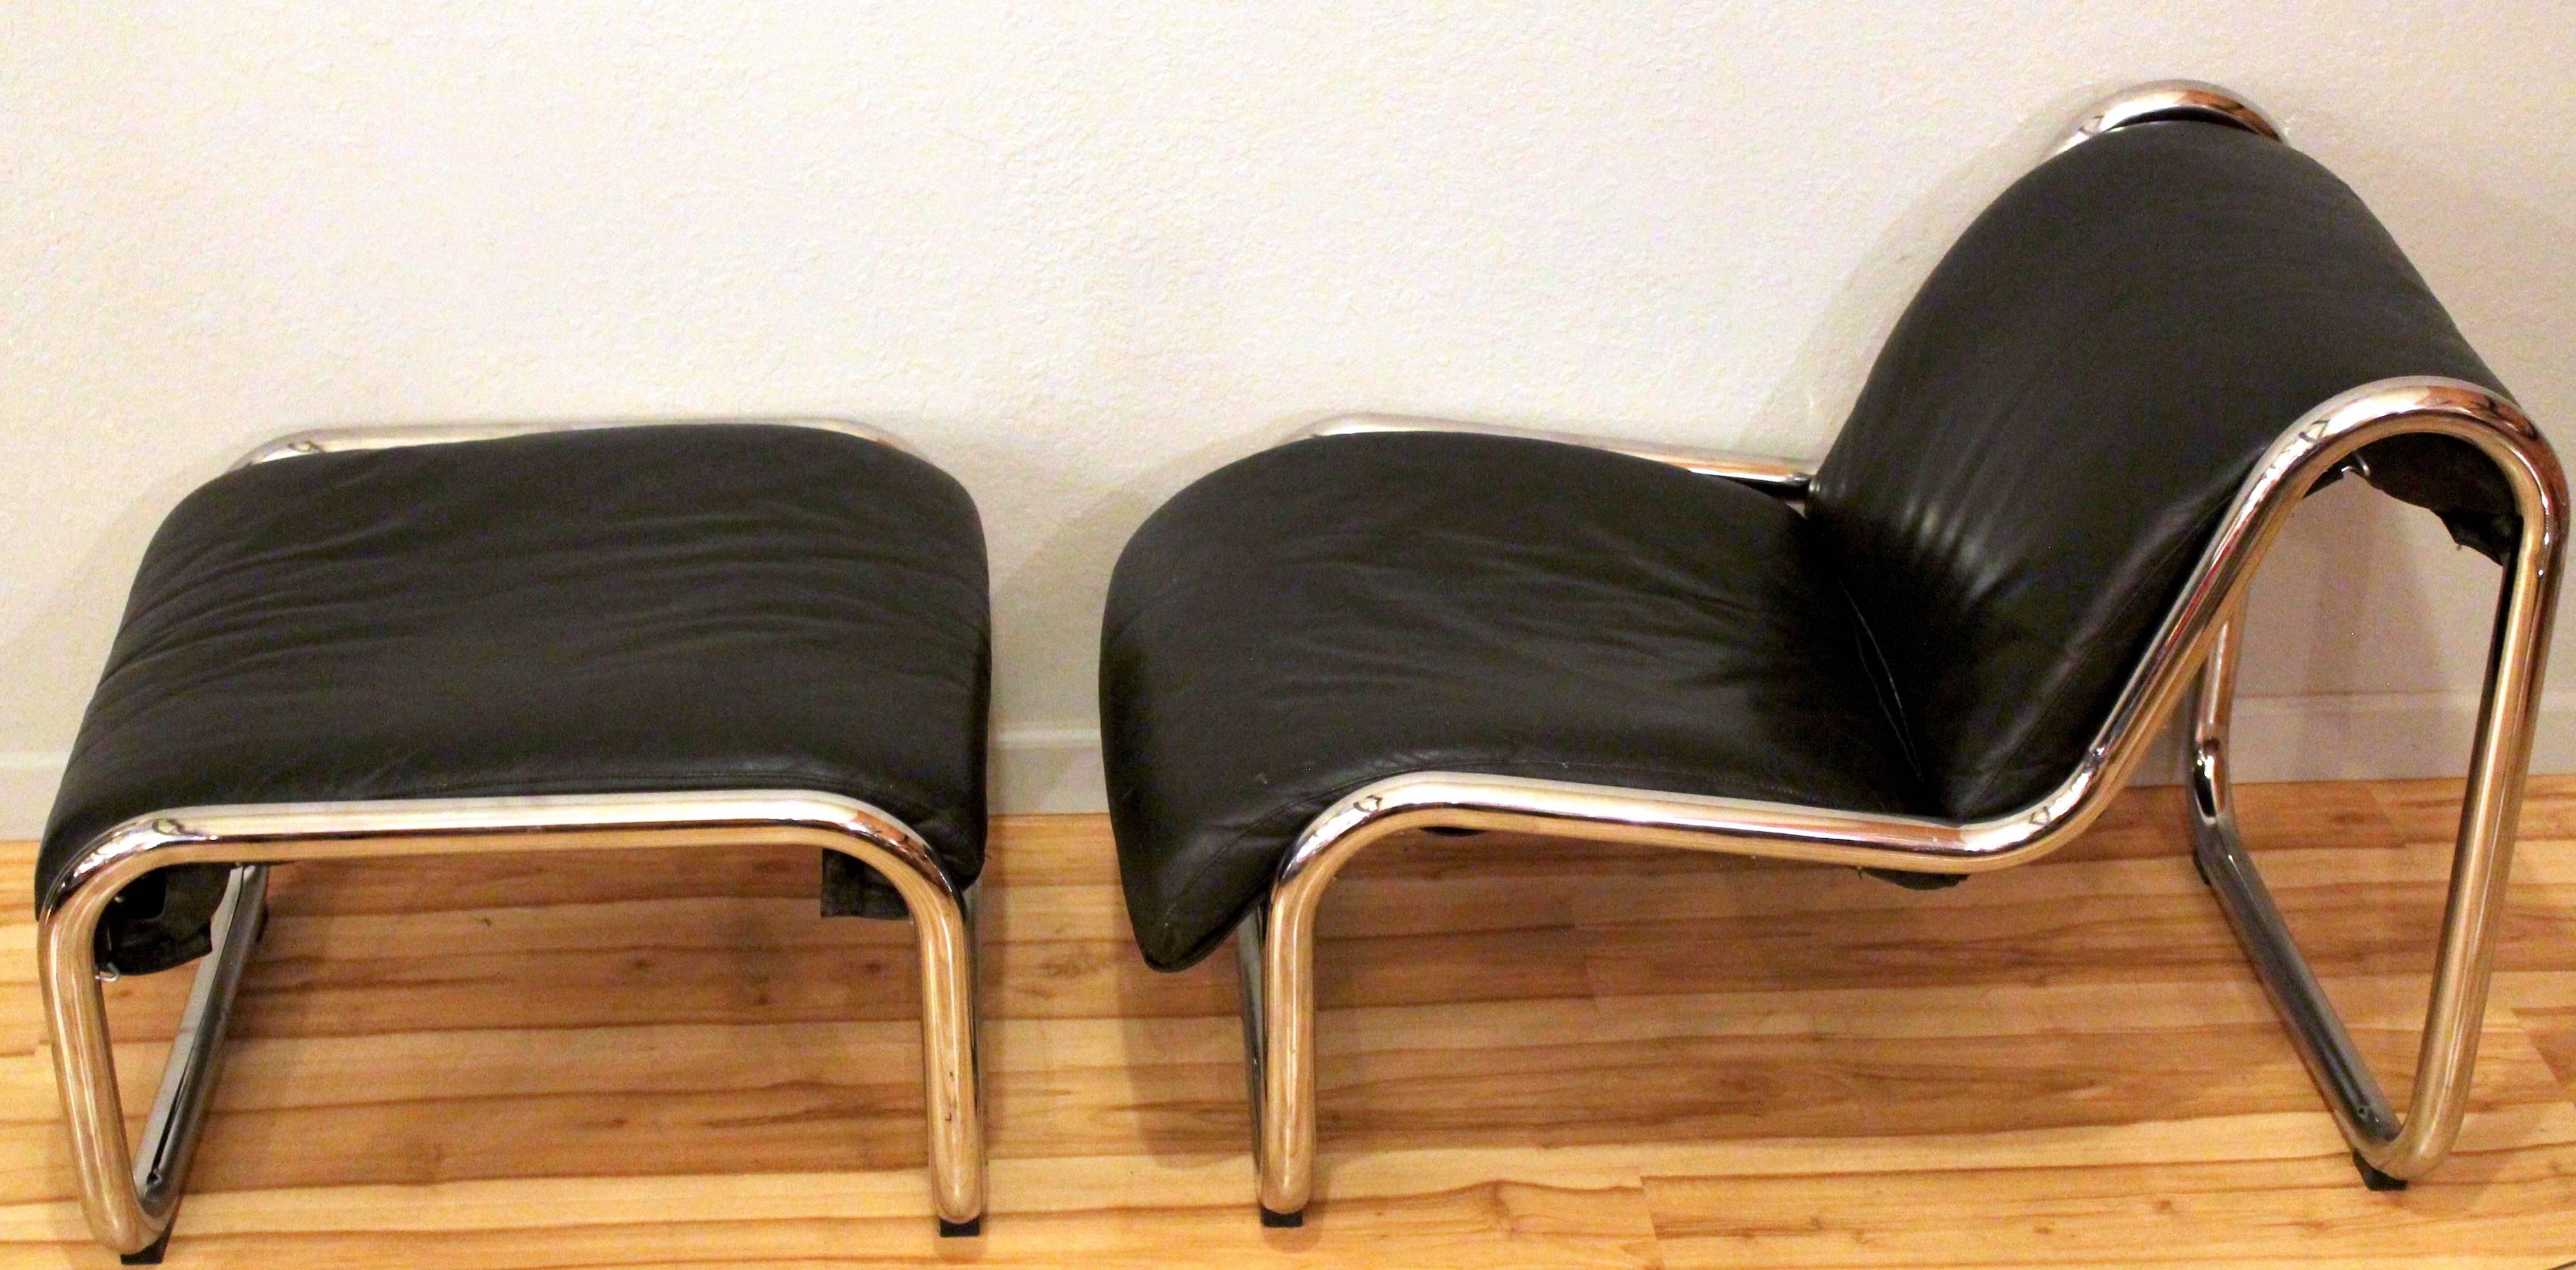 1970s mod black leather and chrome lounge chair and ottoman by Kinetics Furniture of Canada. No marks or tears.

Chair measures 24